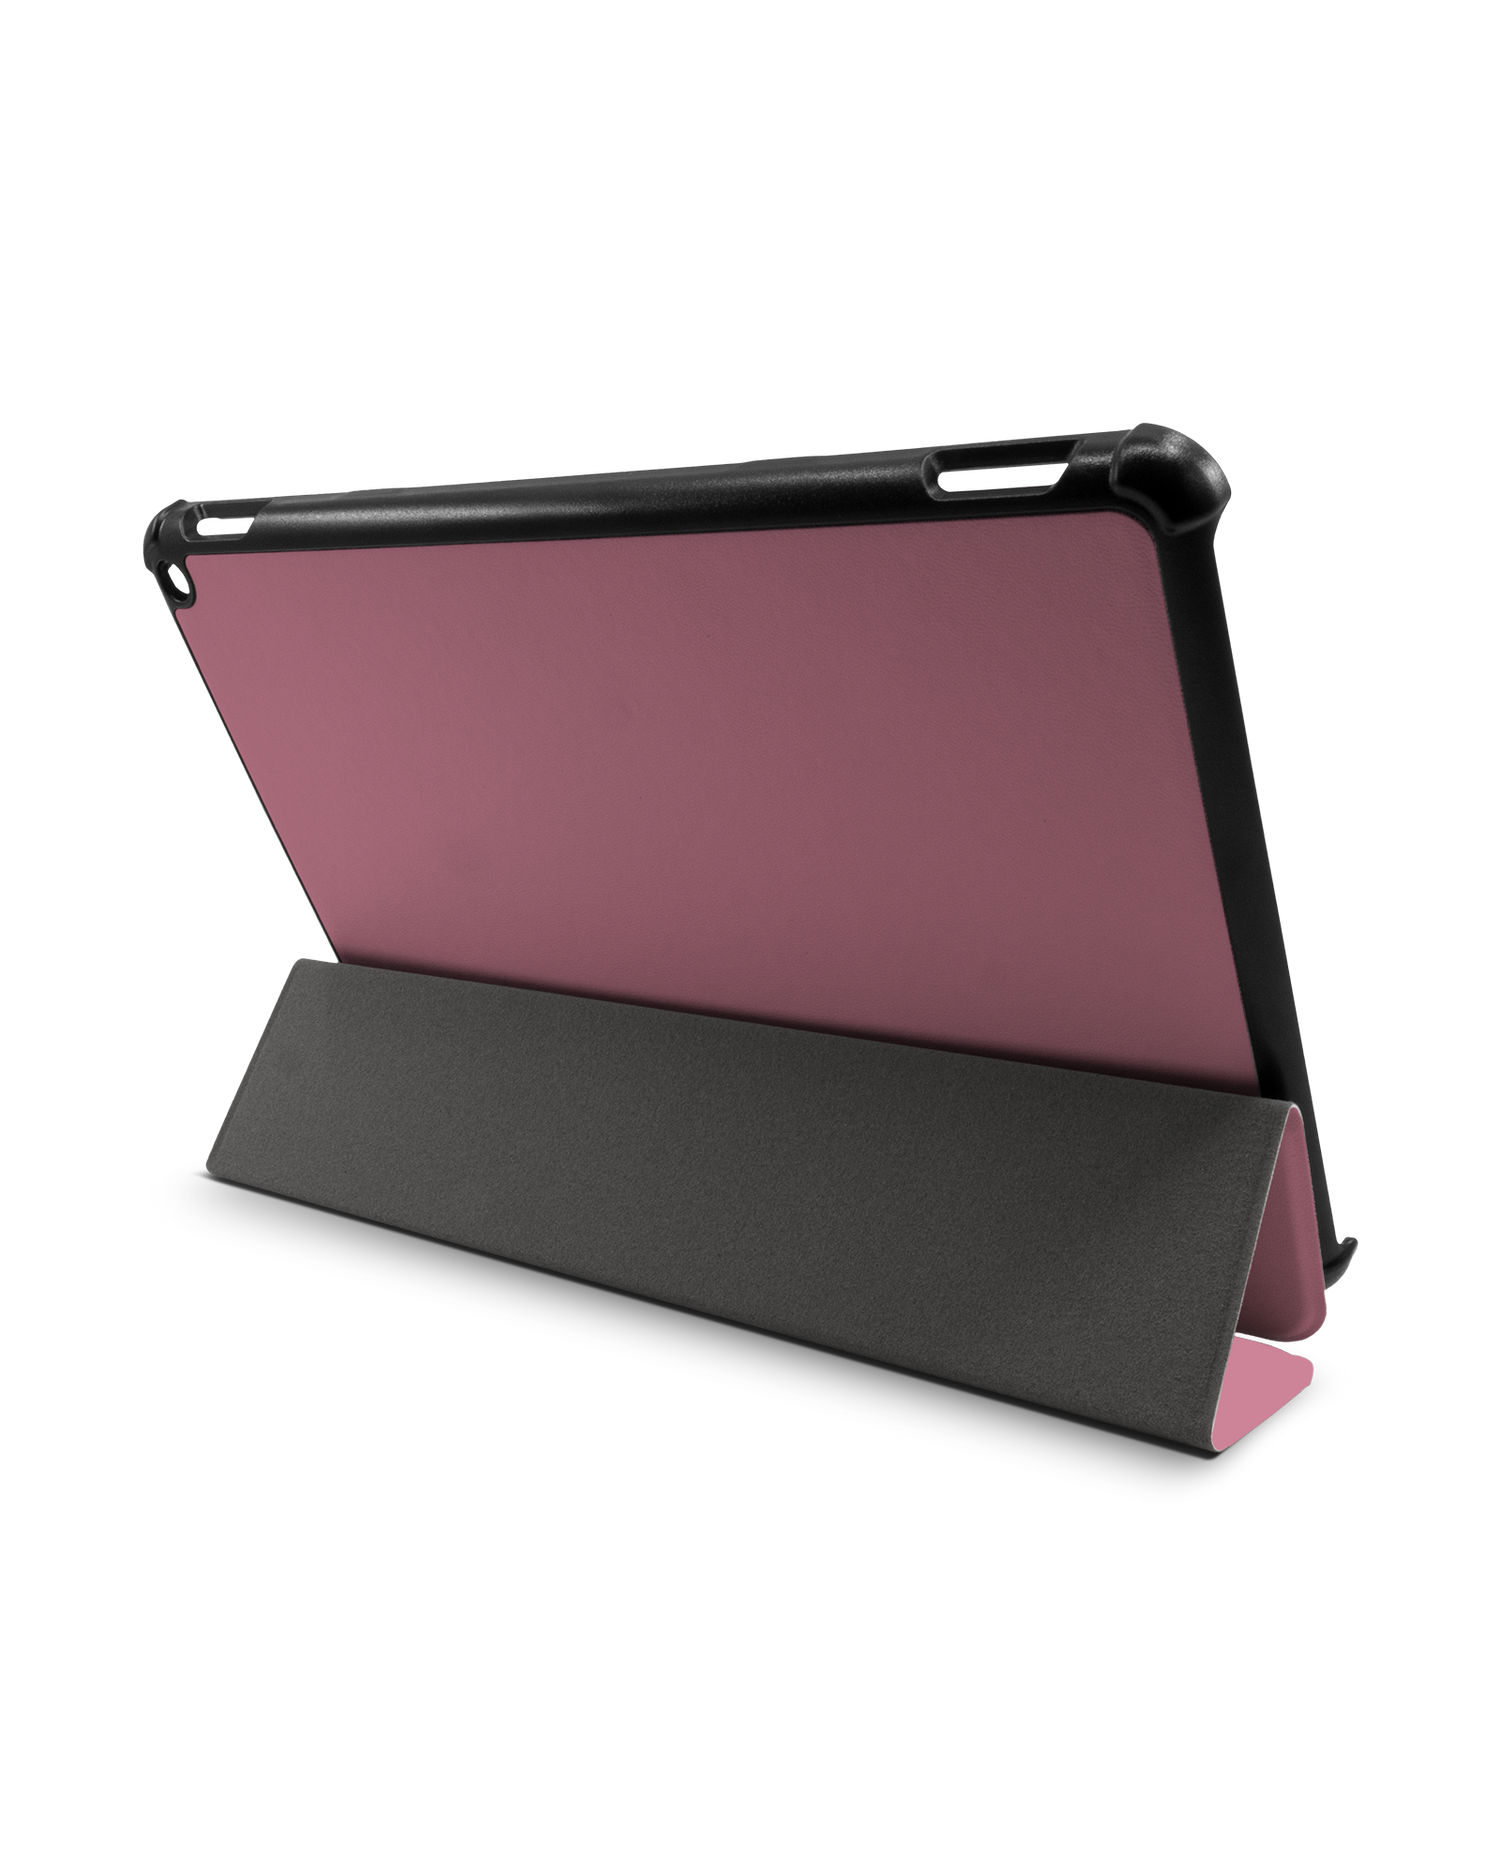 WILD ROSE Tablet Smart Case for Amazon Fire HD 10 (2021): Used as Stand